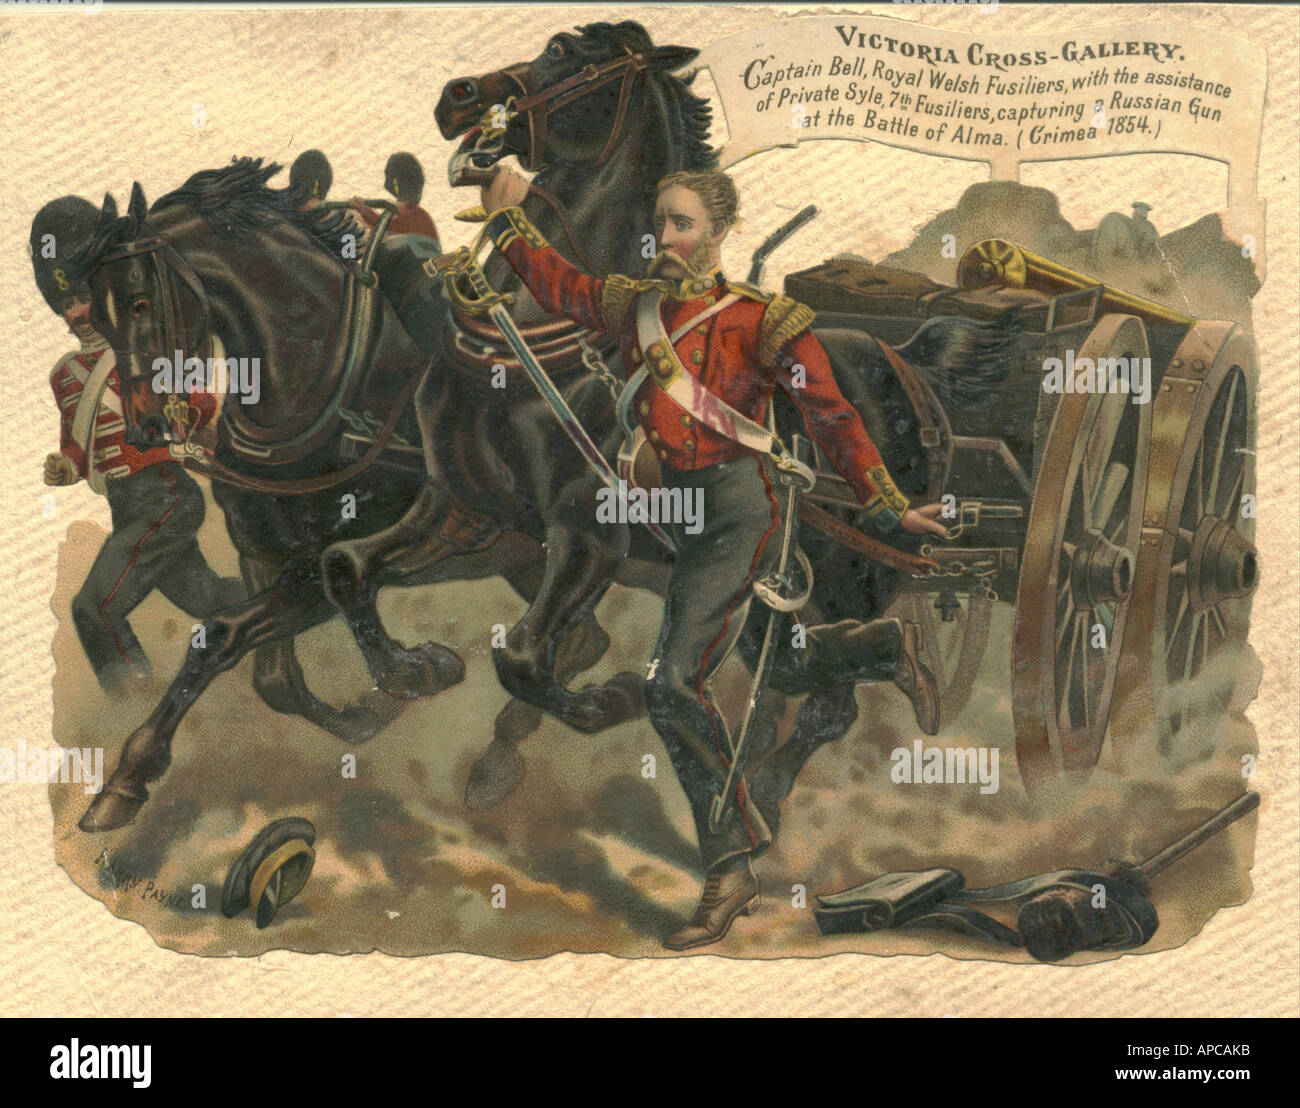 Chromolithographed die cut scrap of Captain Bell winning Victoria Cross in Crimea 1854 by artist Harry Payne 1880 Stock Photo